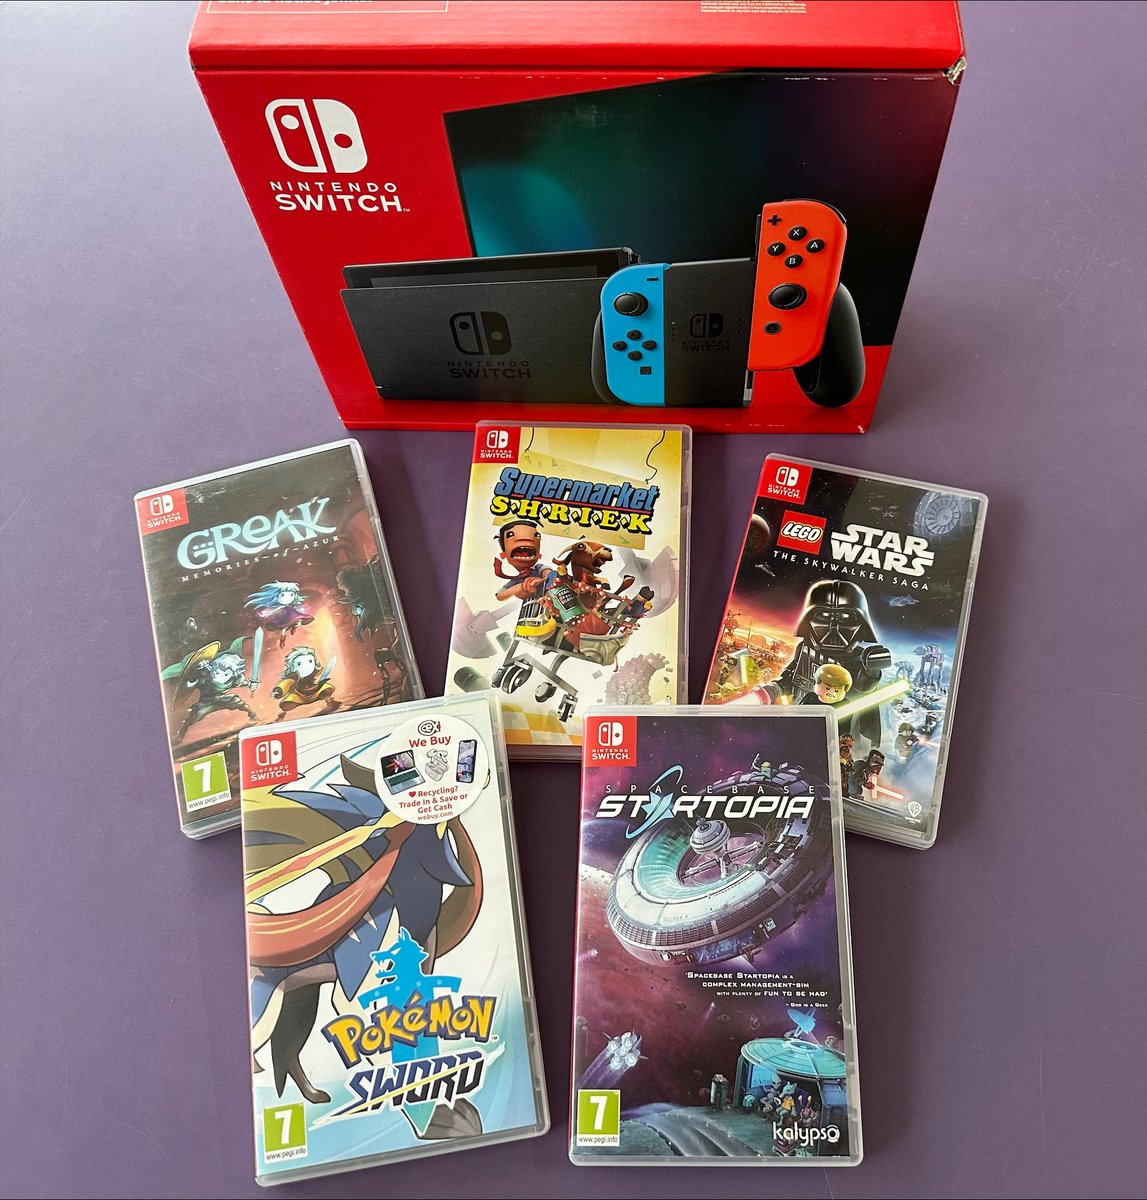 Thanks to the charity @gwguk who kindly donated a Nintendo Switch and five games for our patients on Rudham Ward. Read more about the charity here: getwellgamers.org.uk